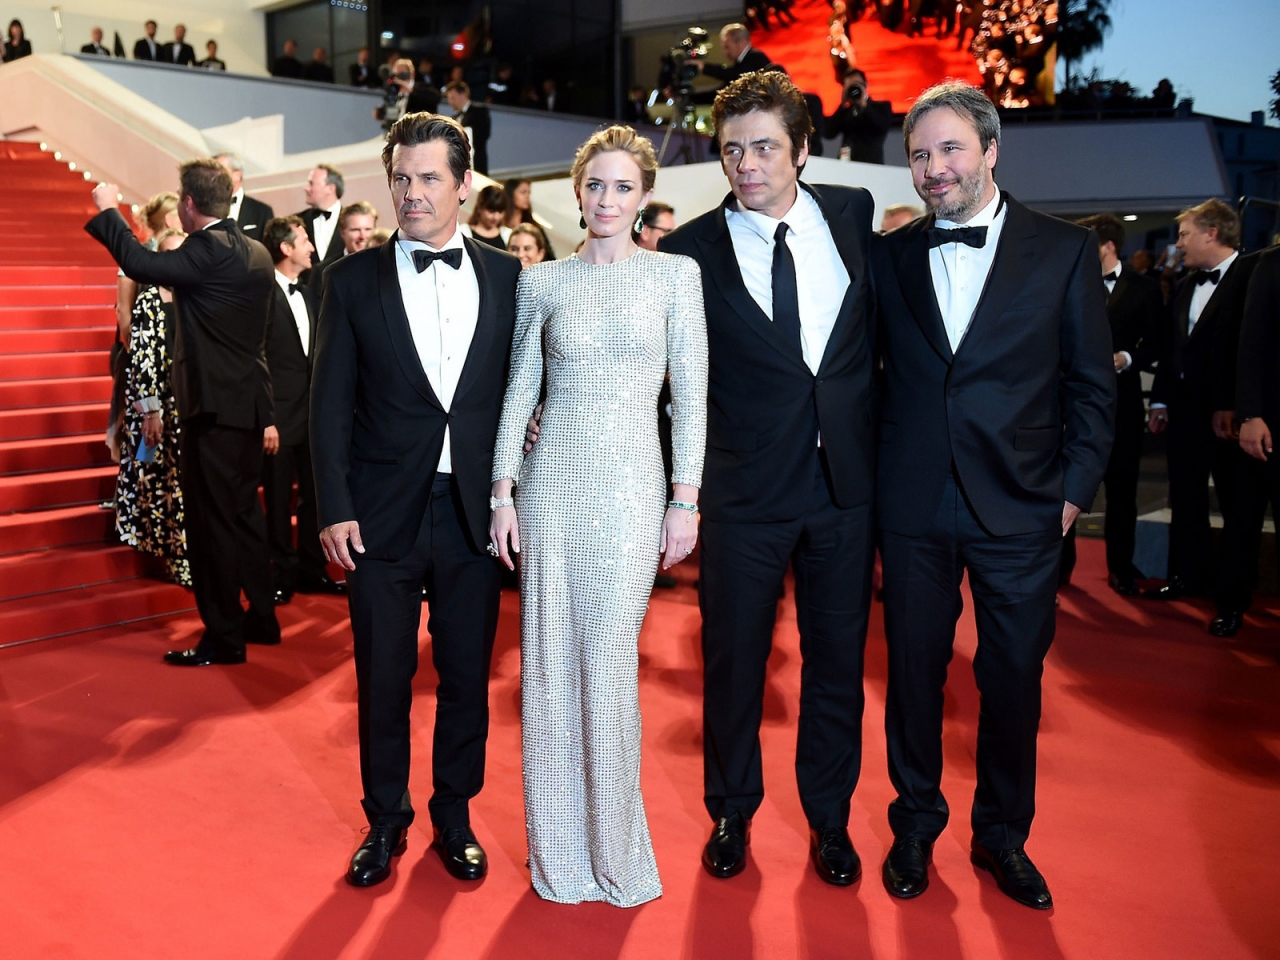 Sicario at Cannes for 1280 x 960 resolution